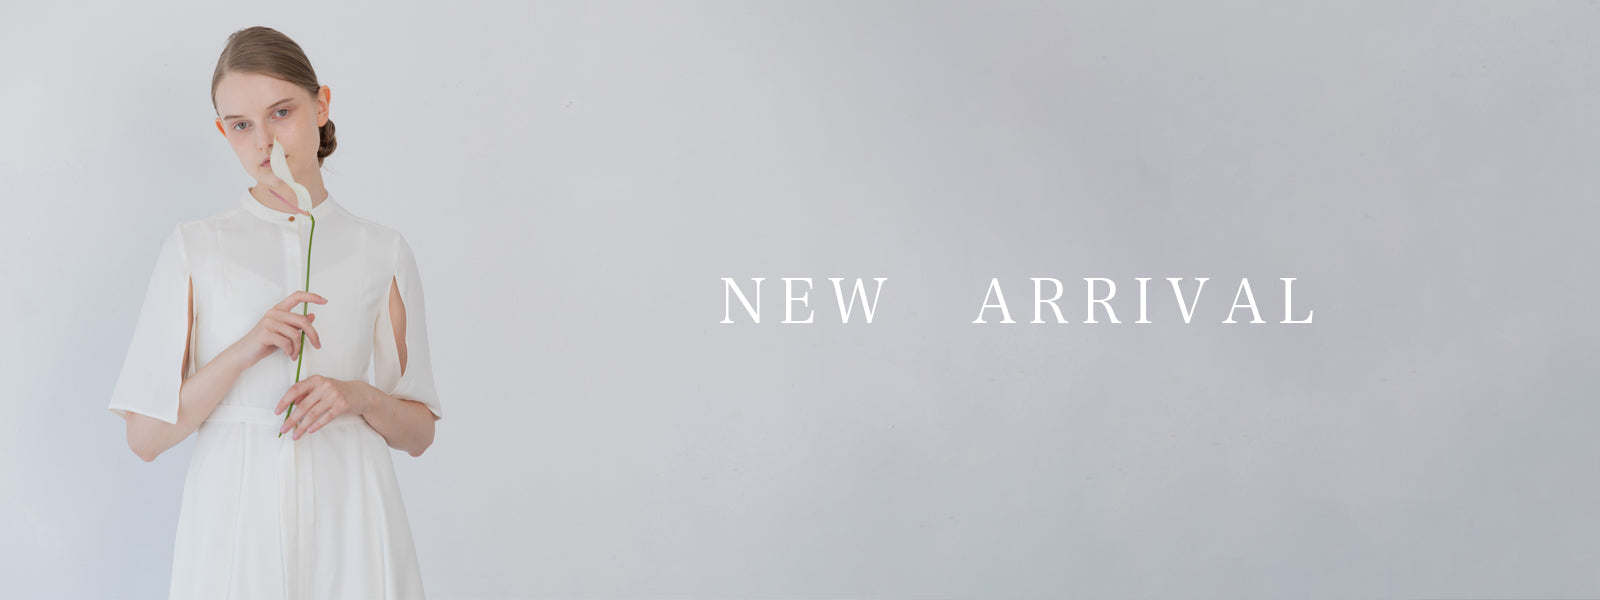 NEW ARRIVAL_banner